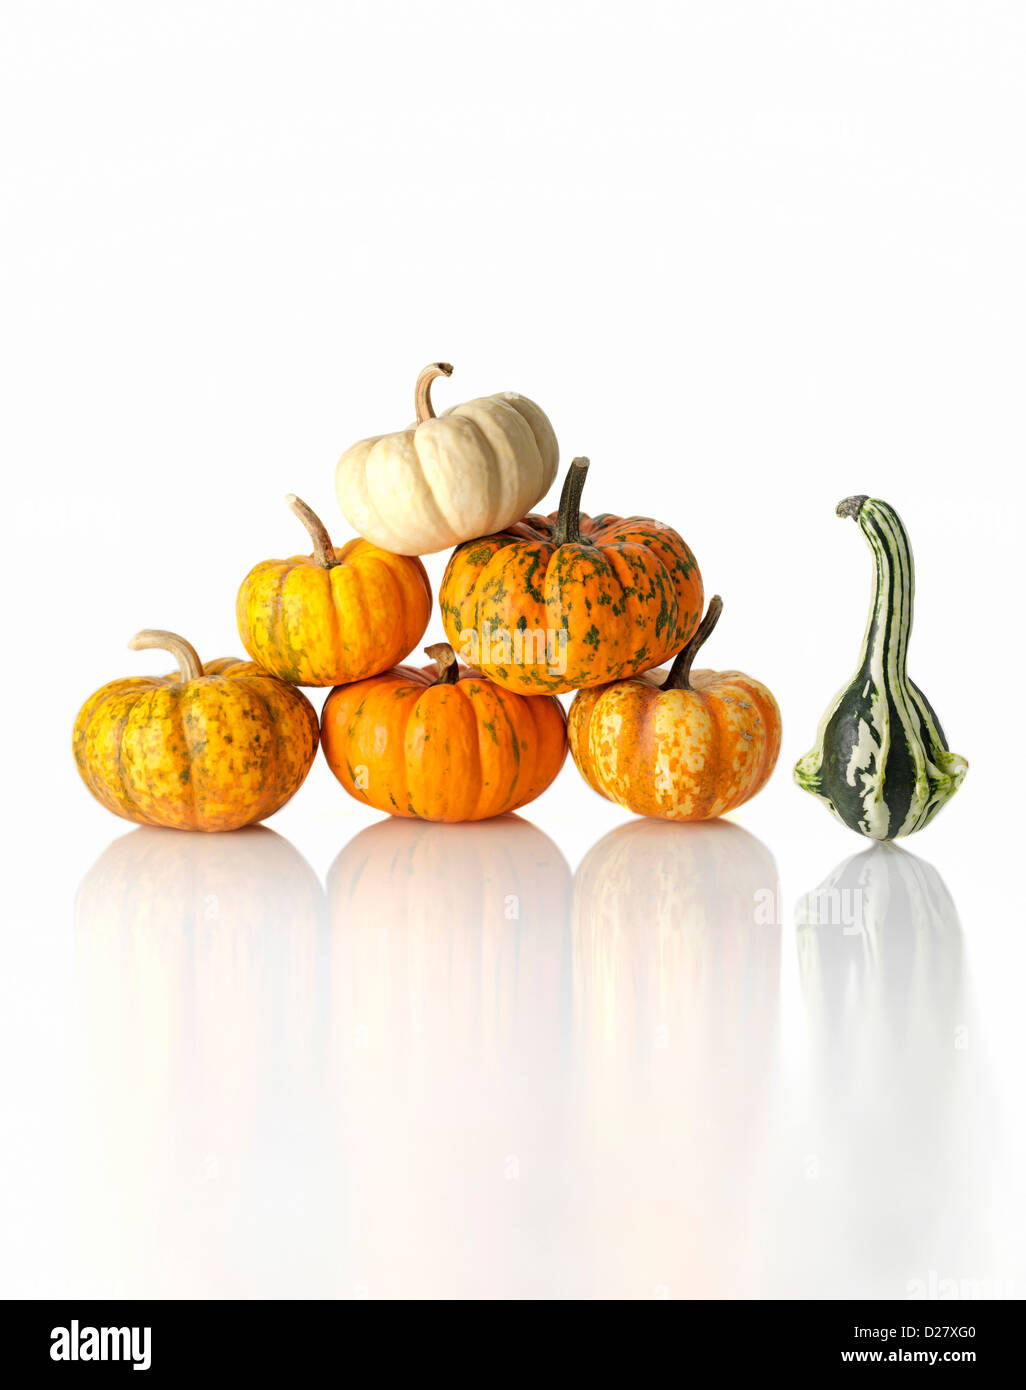 One Gourd Next to Stack of Small Pumpkins on White Background Stock Photo